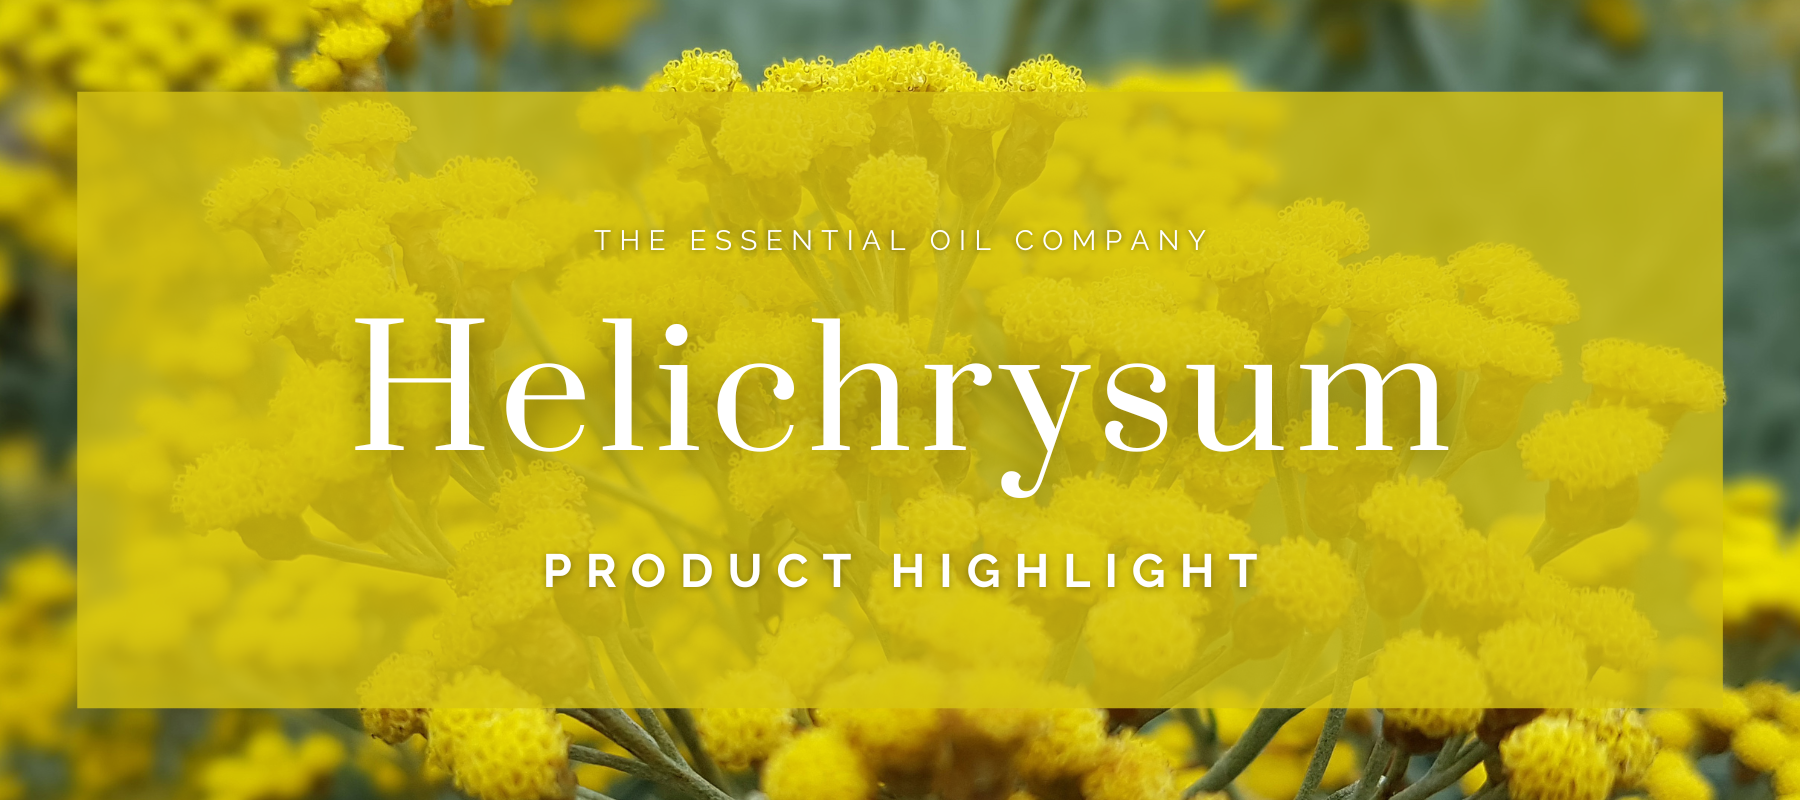 Helichrysum: Product Highlight